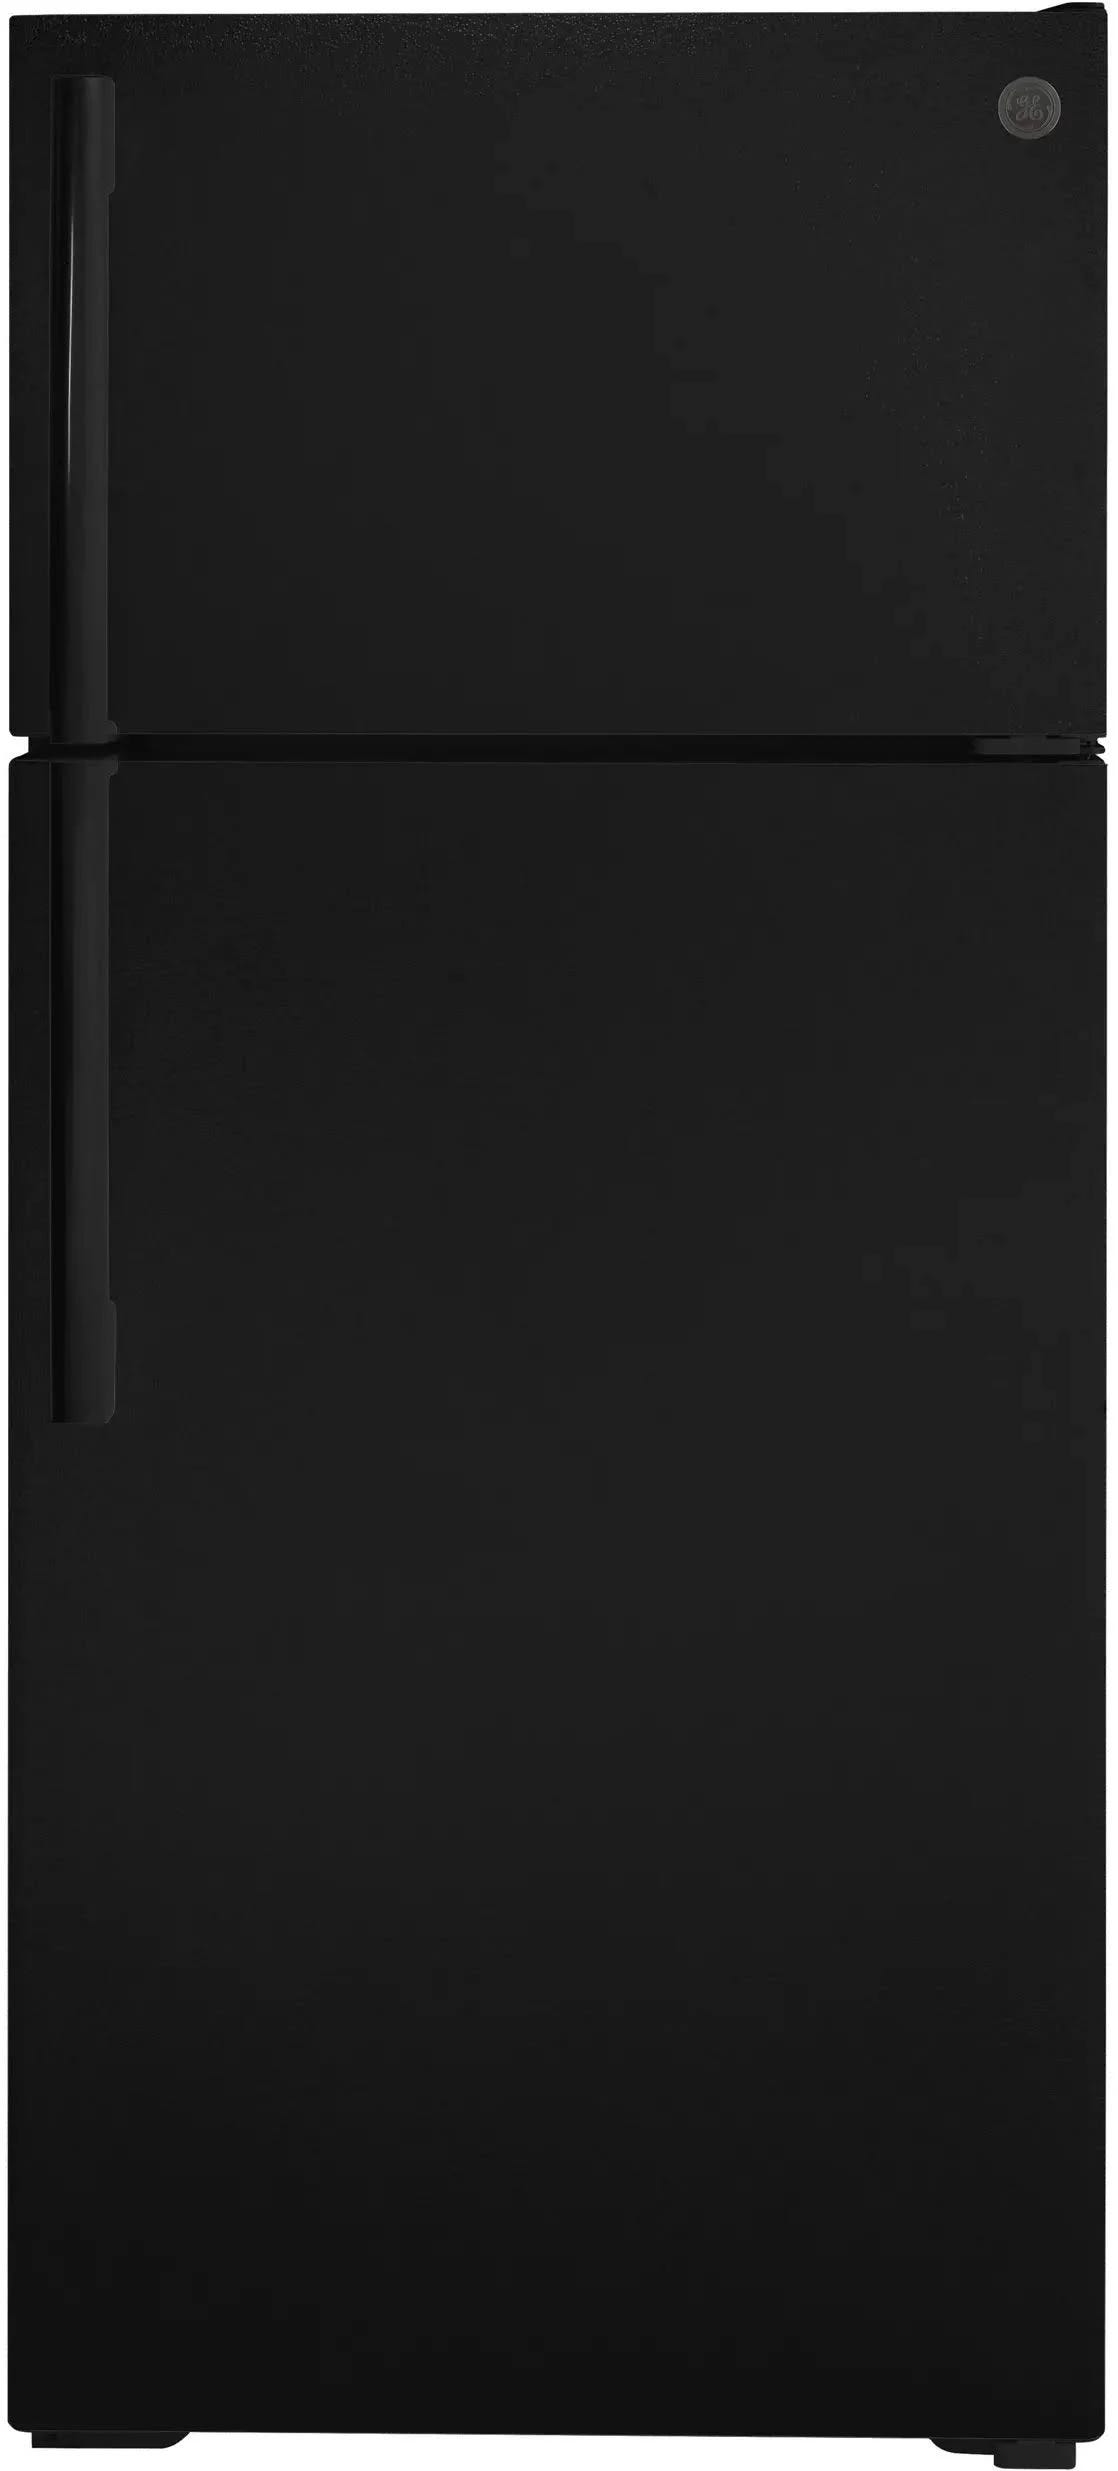 Modern Black Refrigerator with Top-Tier Features | Image